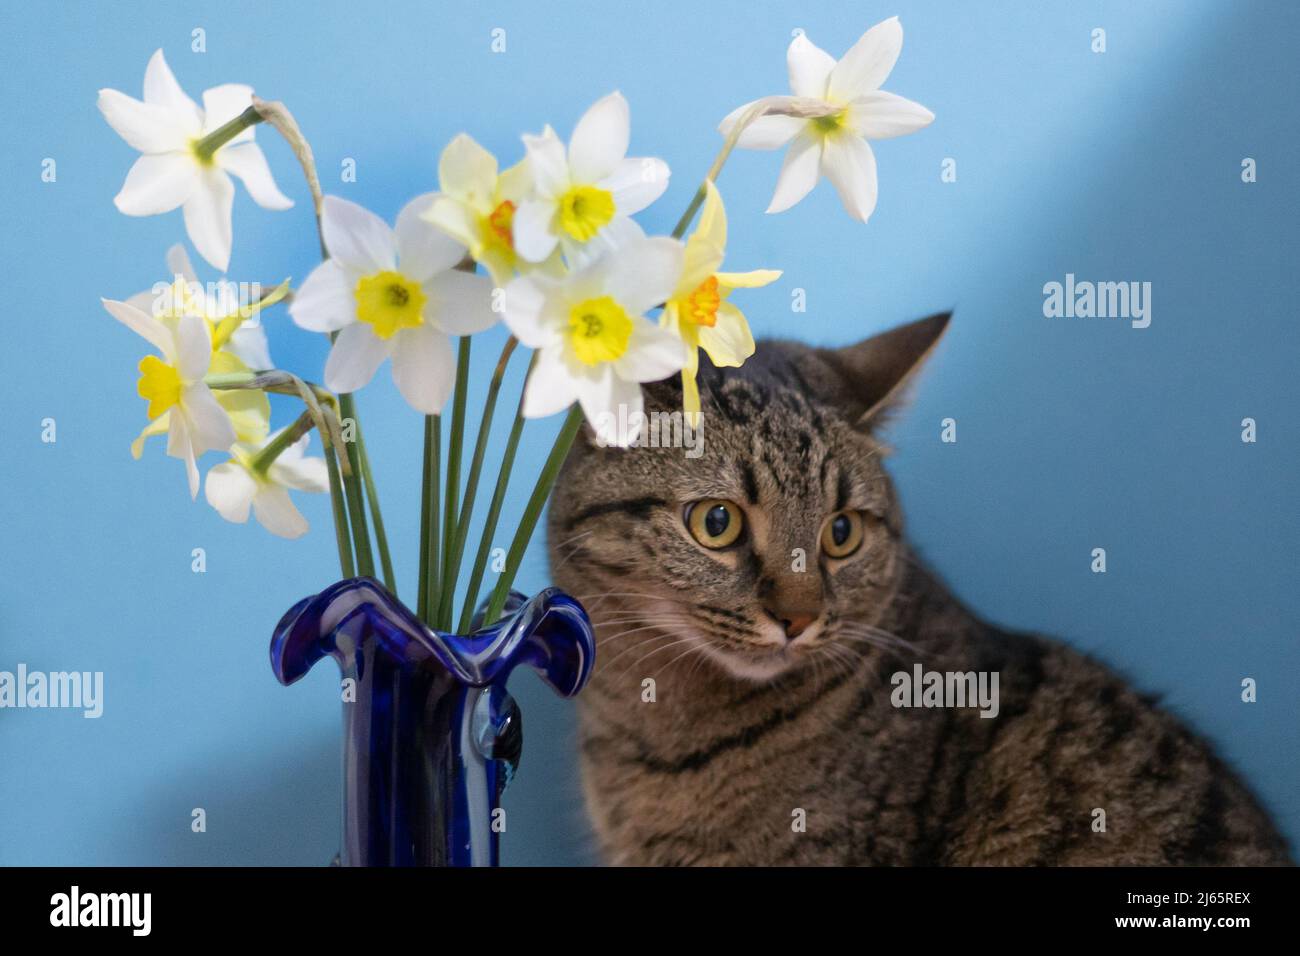 Cat and flowers. White and yellow daffodils on a blue background. Flower with orange center. Spring flowers. A simple daffodil bud. Narcissus bouquet. Floral concept. Stock Photo